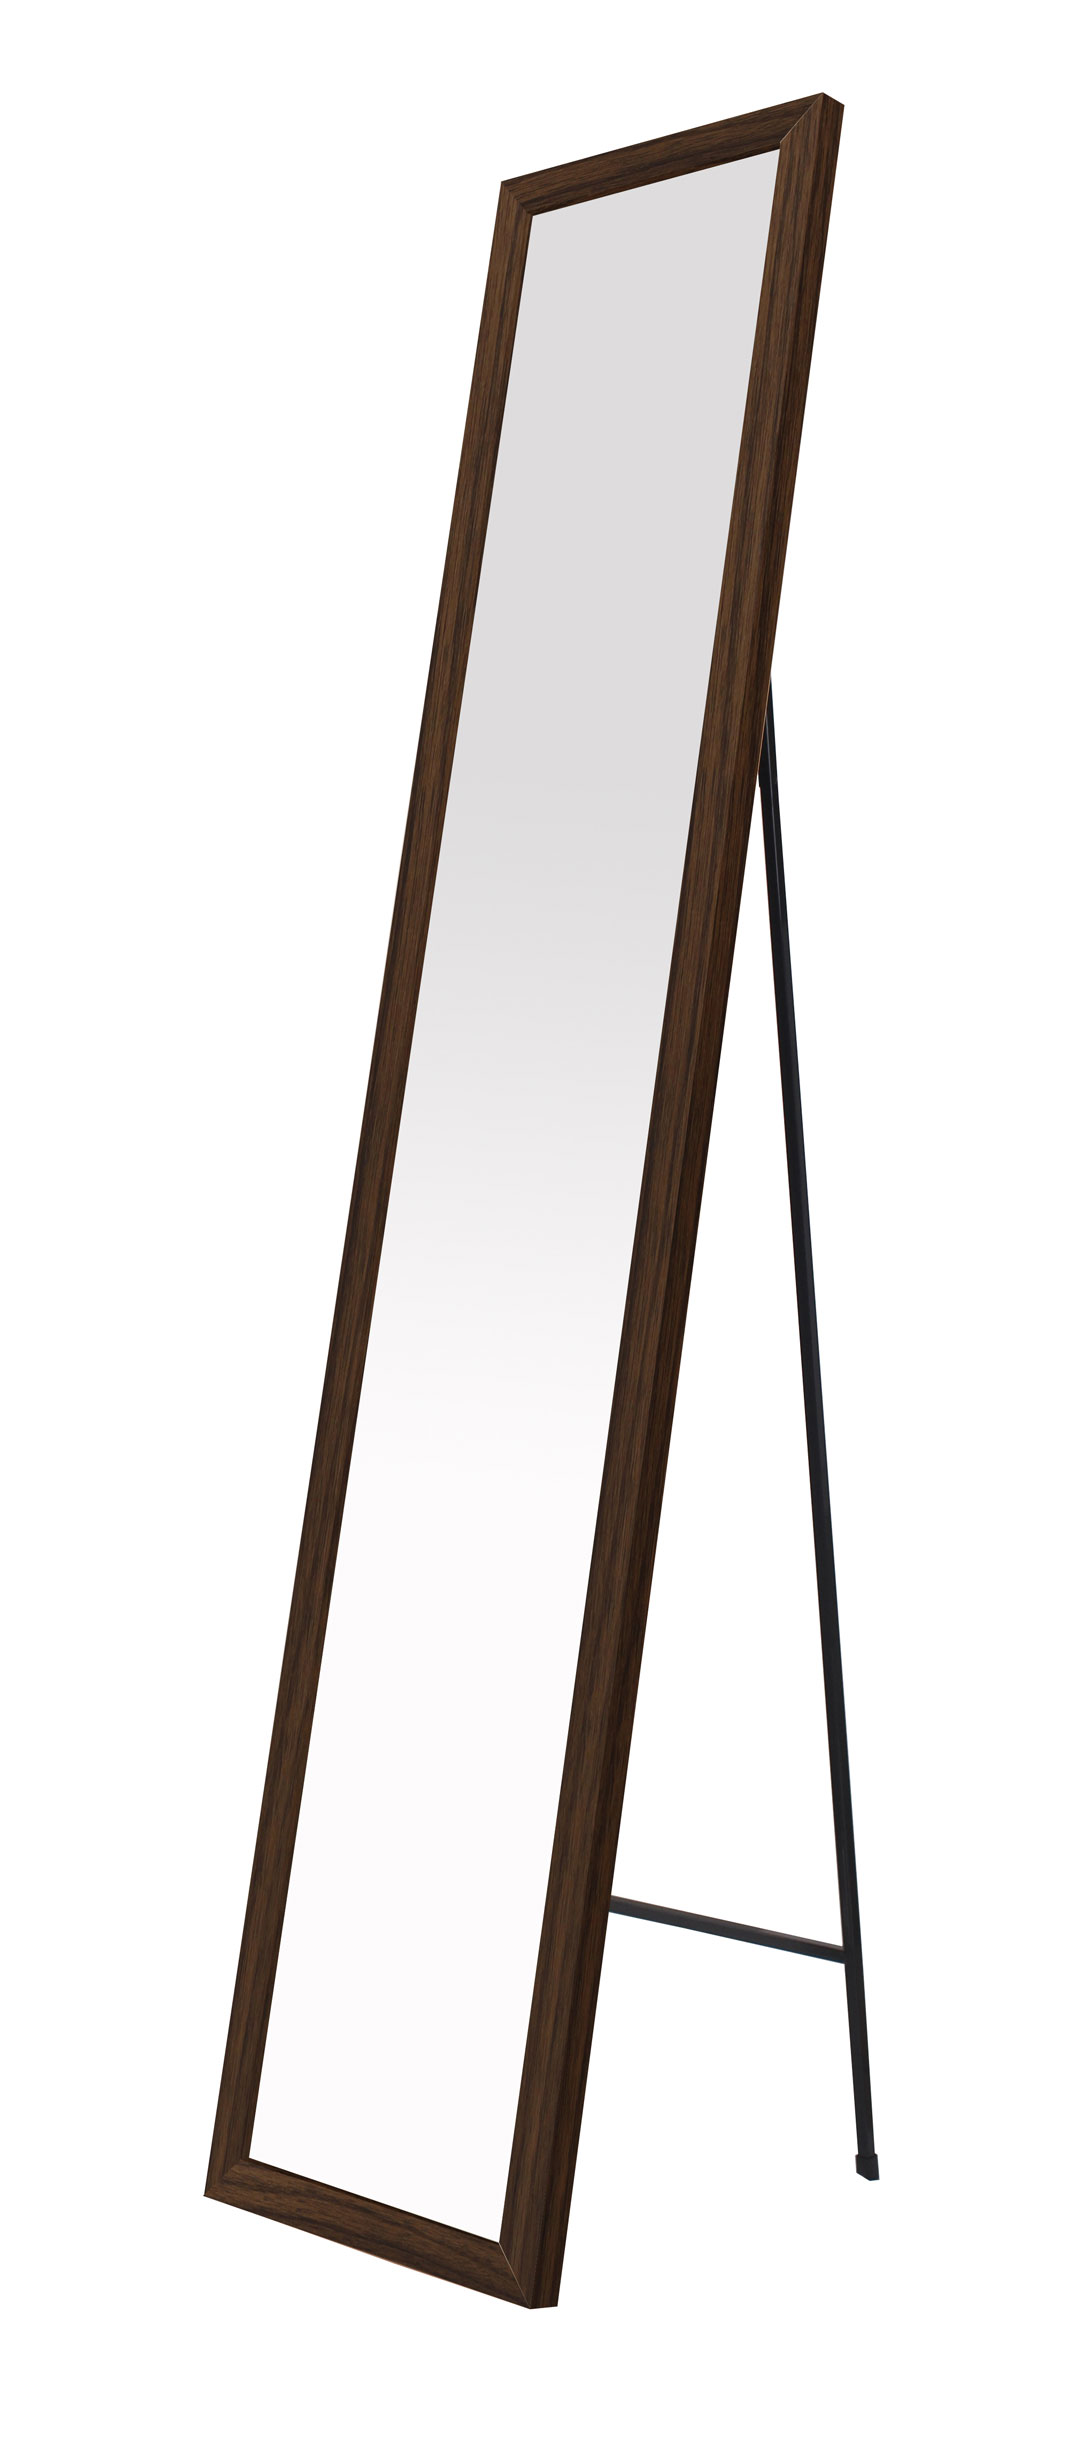 SUPERLIVING FULL BODY MIRROR WITH STAND 30X150CM 2 COLORS